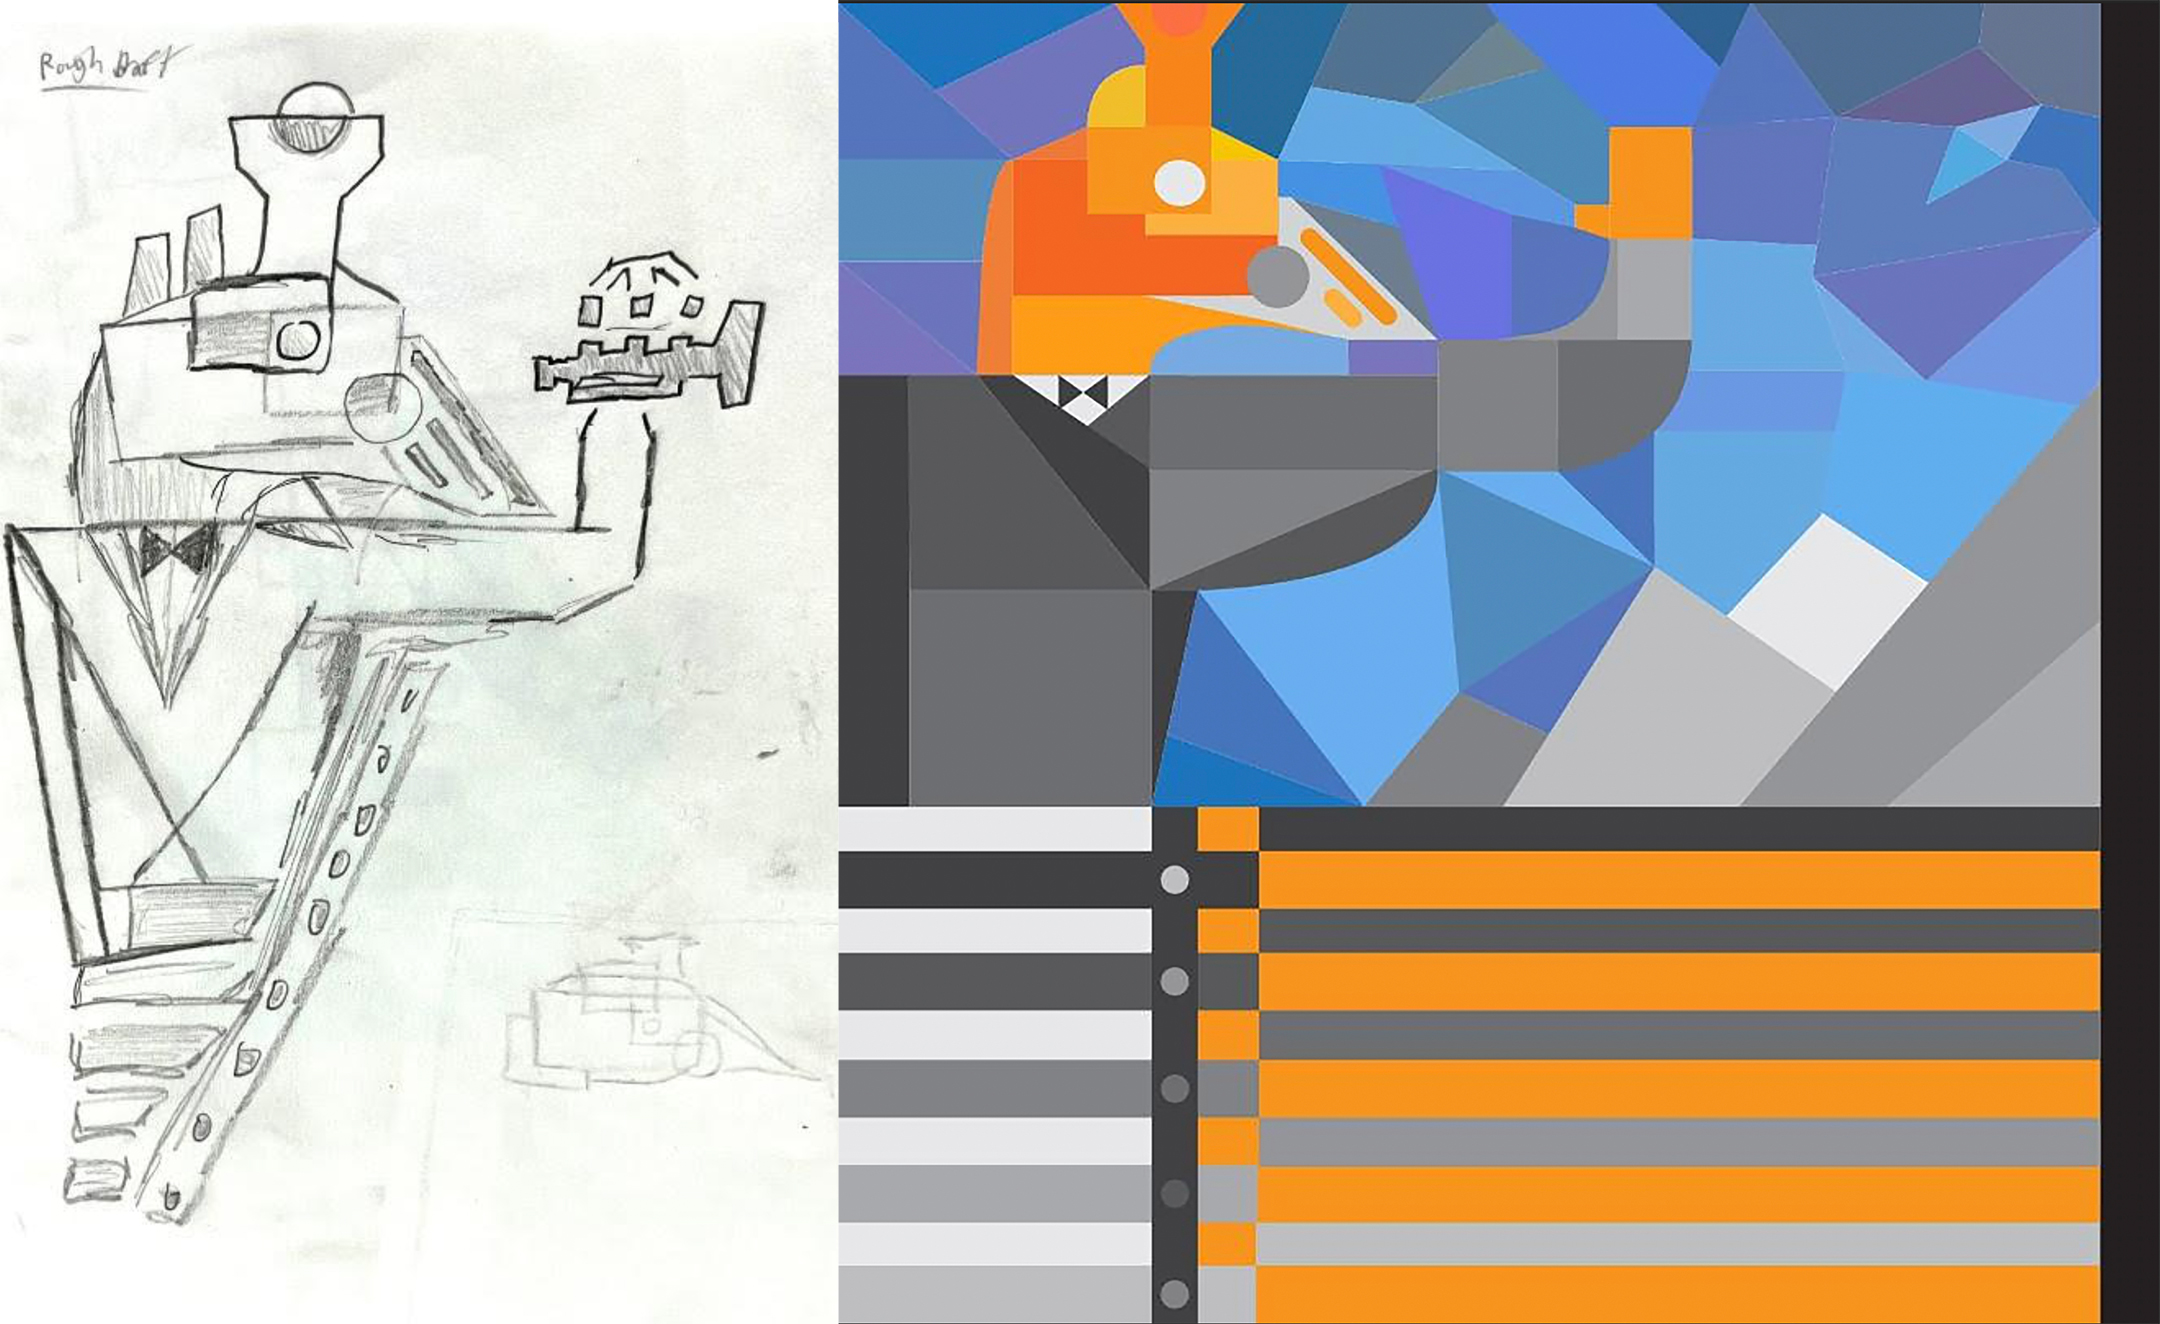 Black and white pencil sketch, on the left, and the final abstract illustration, on the right, of a form with an orange head and gray, suit-like body above a row of black and white and orange and gray lines